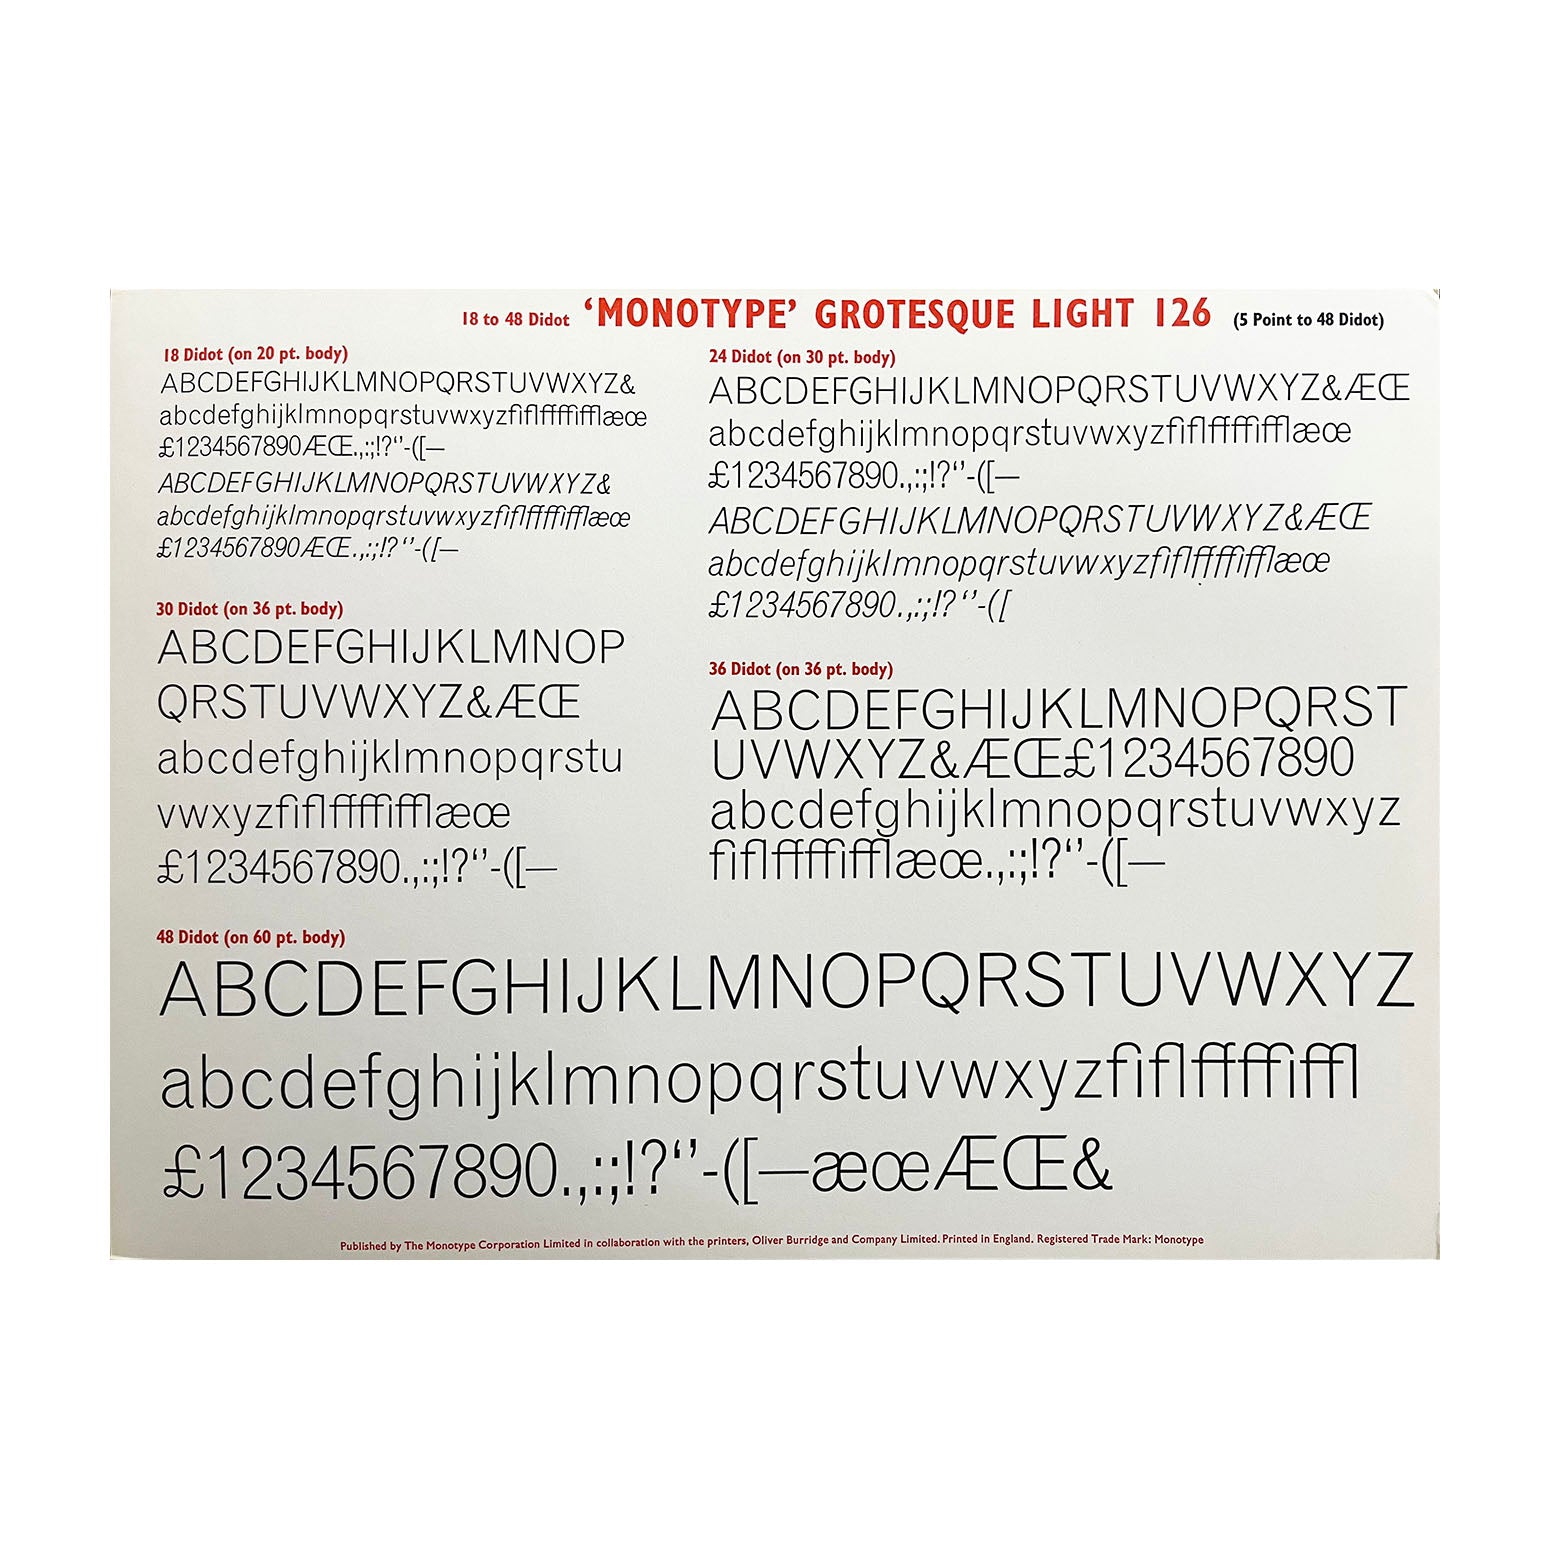 printer’s sample sheet, Grotesque Light 126 (5 to 48 didcot), published by the Monotype Corporation Ltd. From the Curwen Press. 